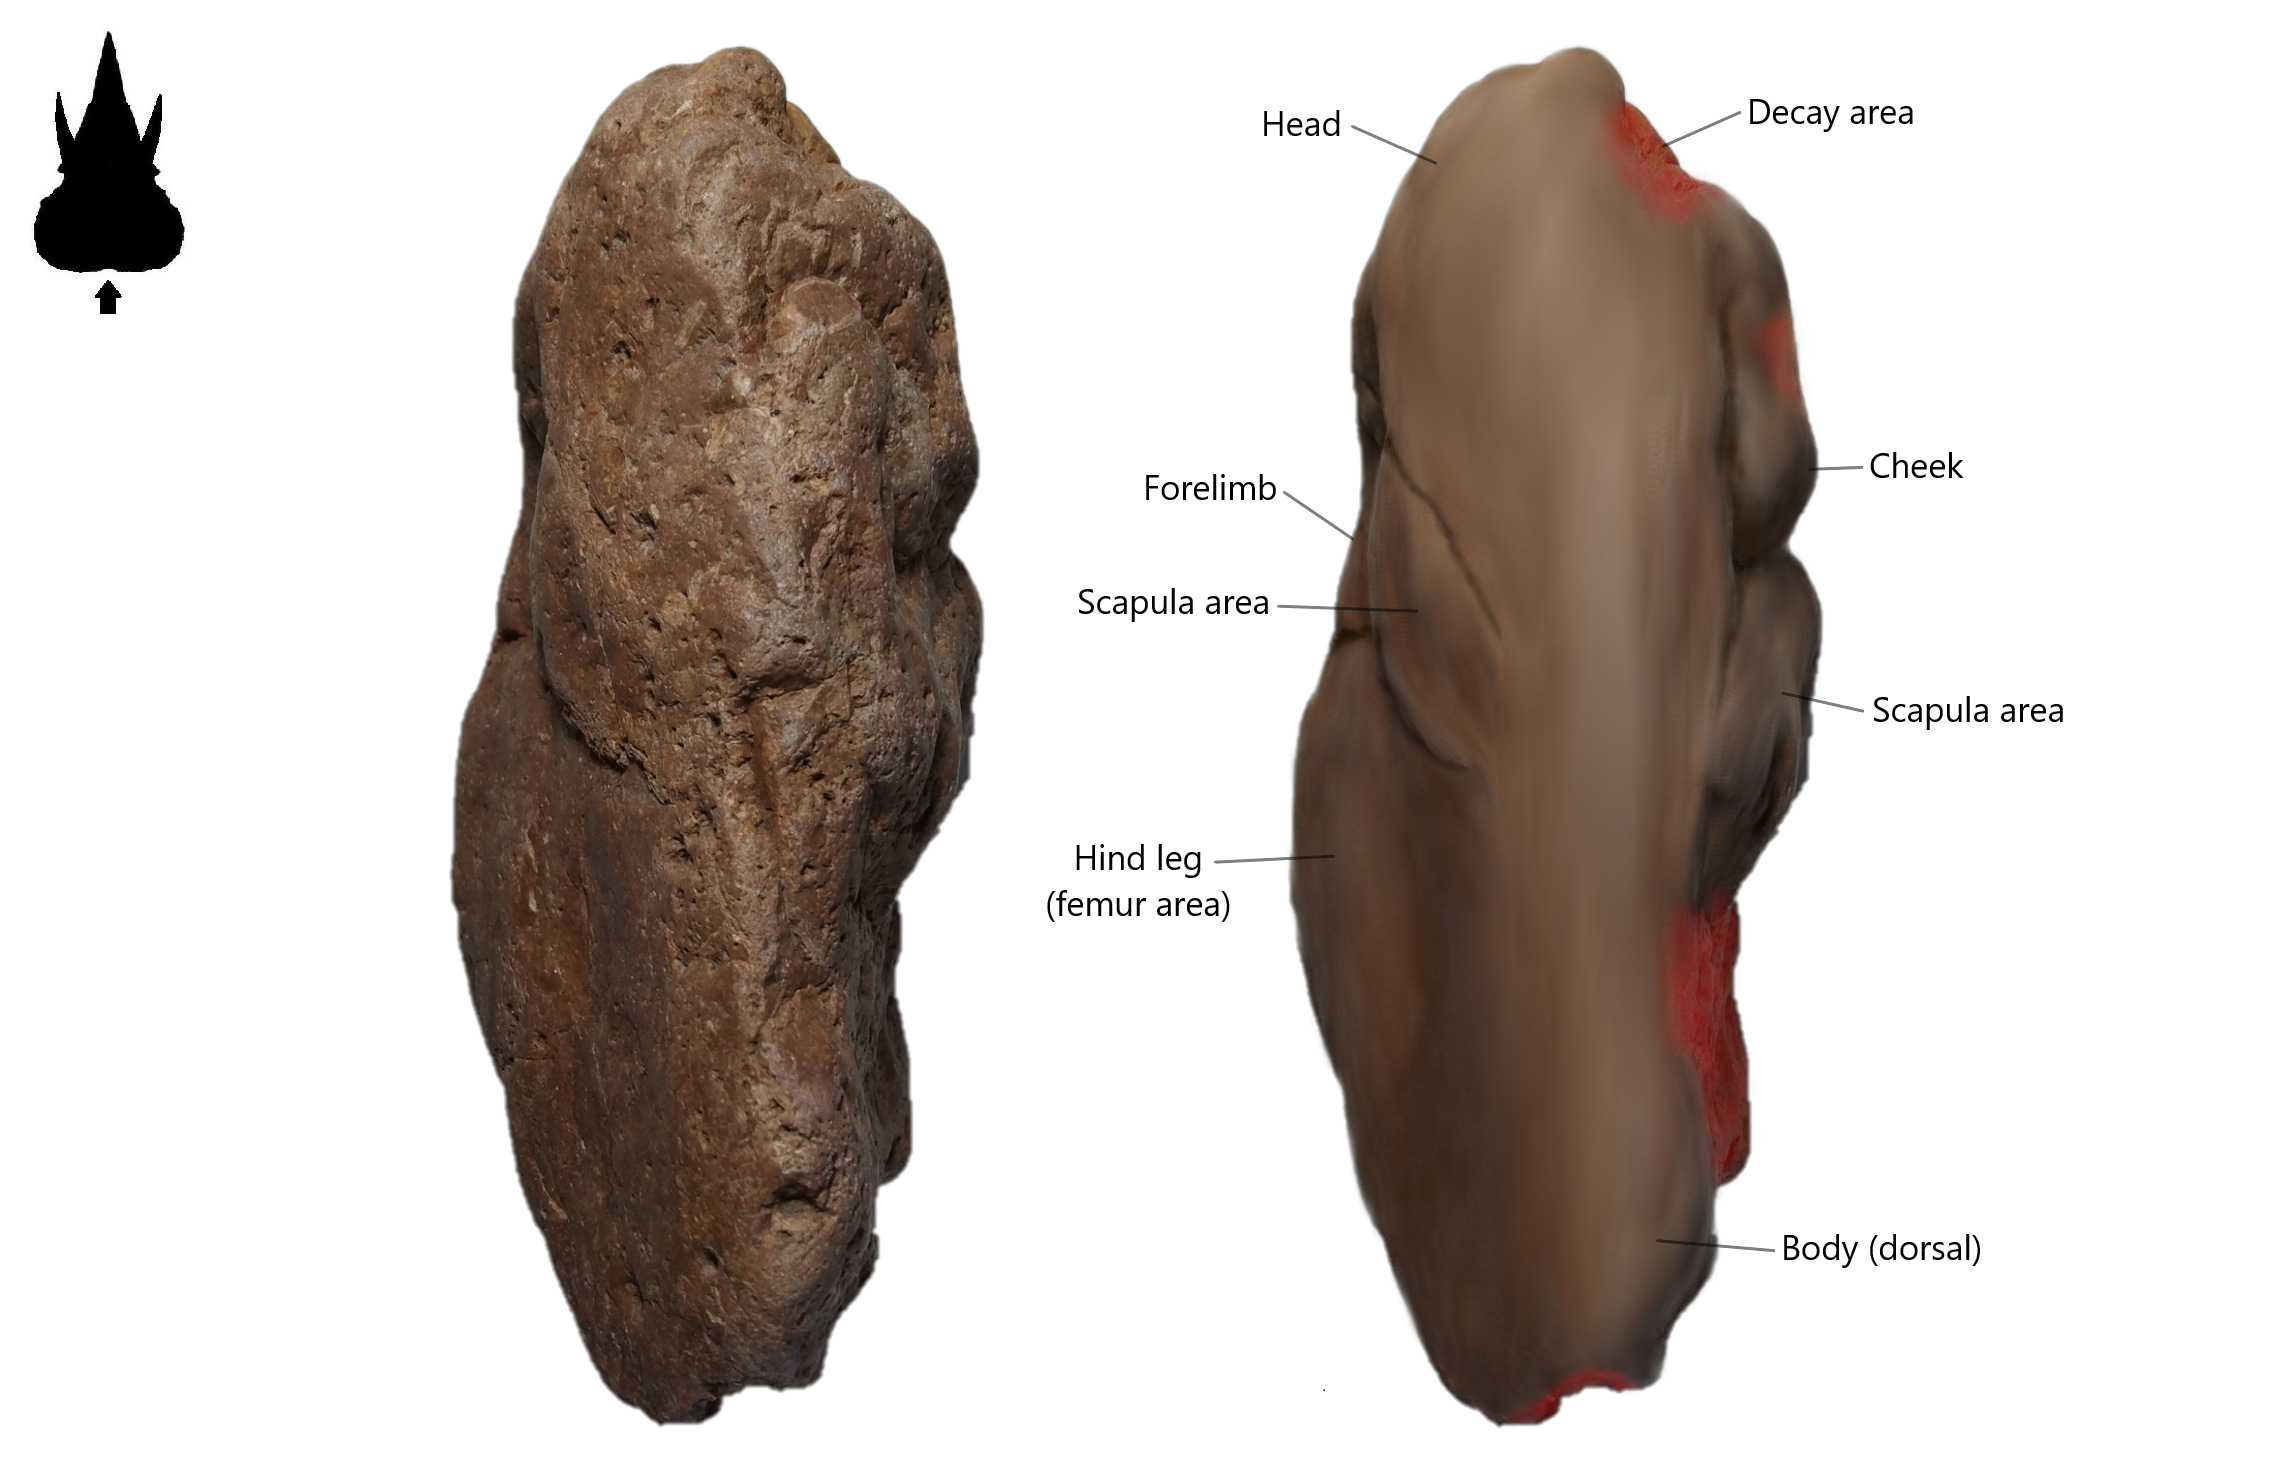 Figure 4. The dorsal view (backside of body) on Brachylophosaurus canadensis embryo with its restoration image.